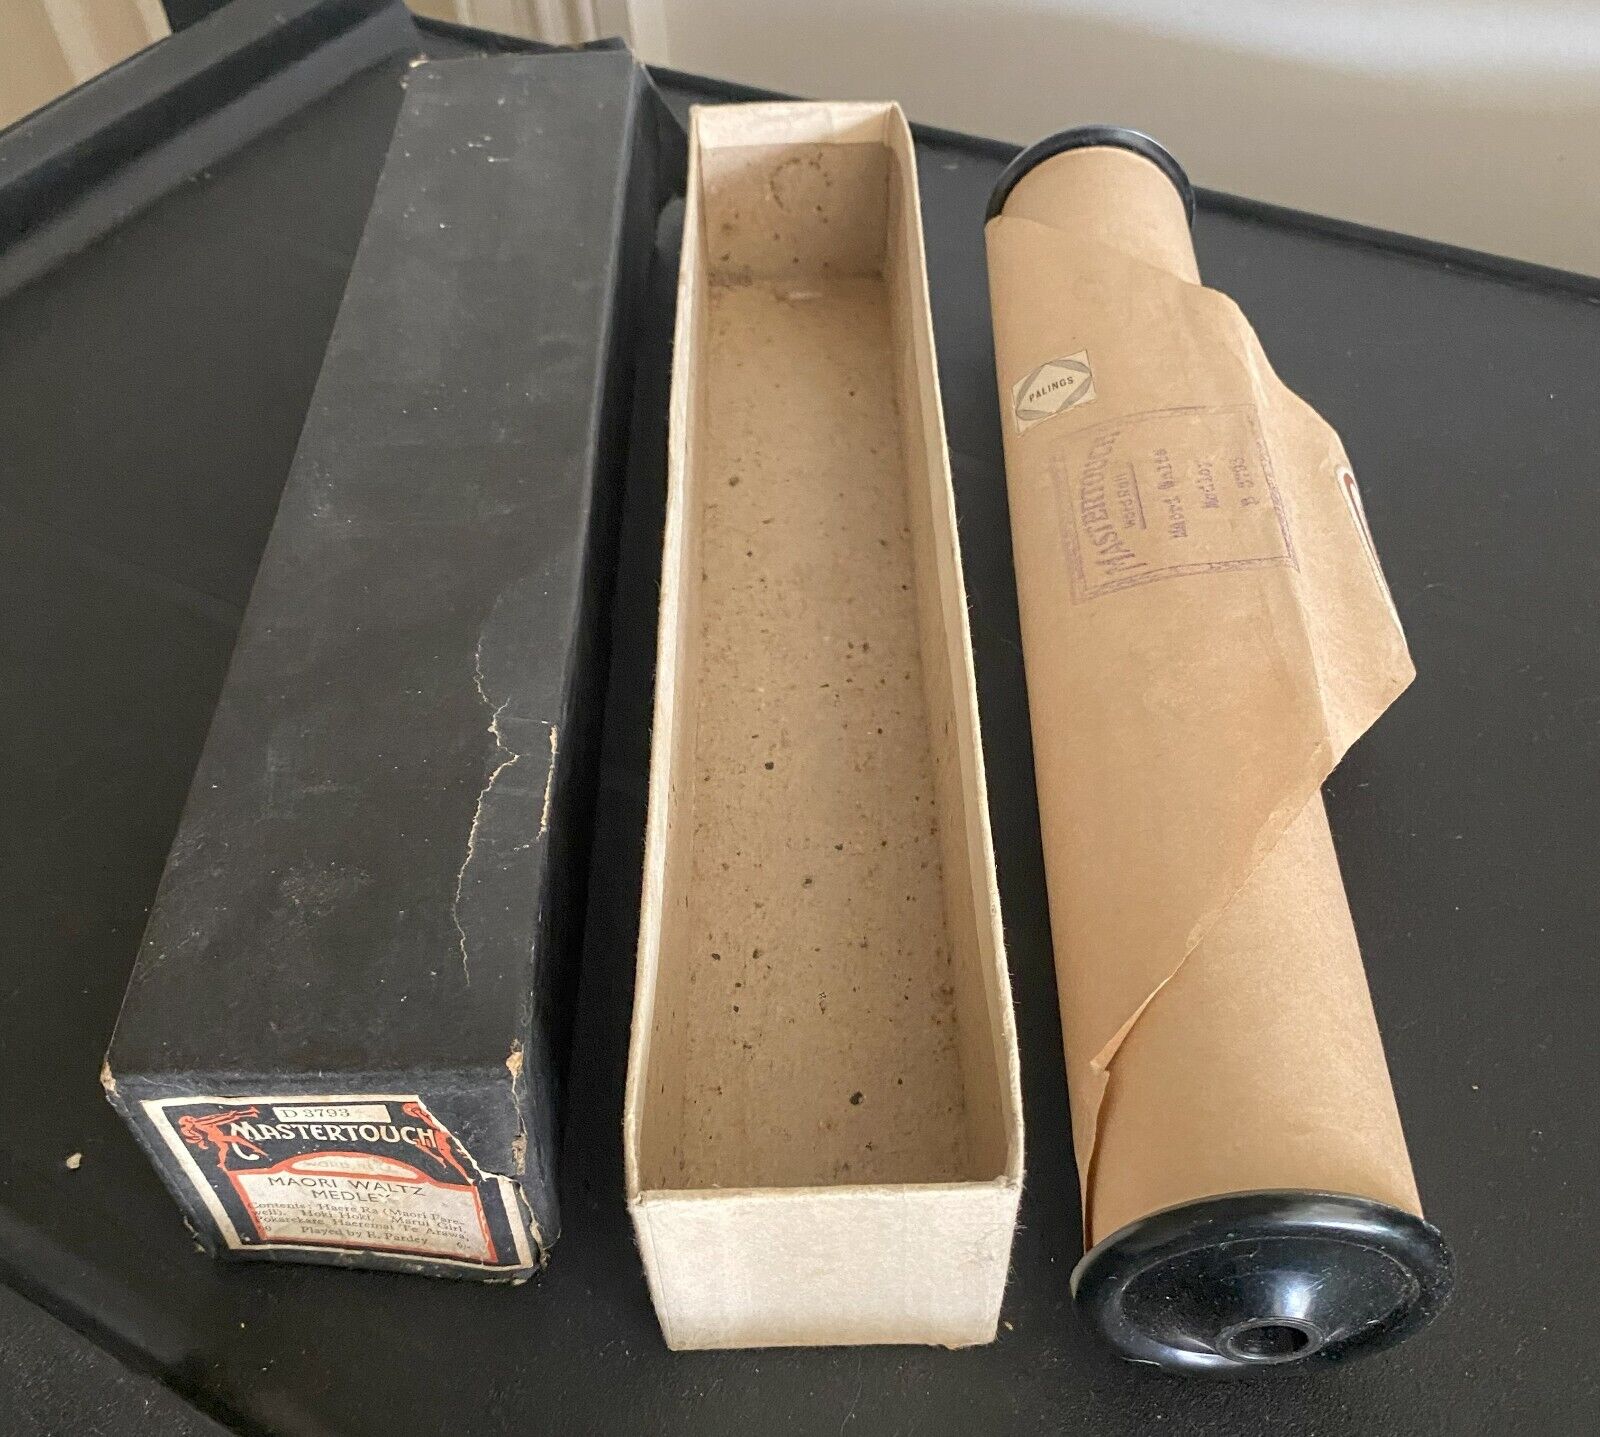 Vintage Pianola Rolls - Broadway, Mastertouch & QRS